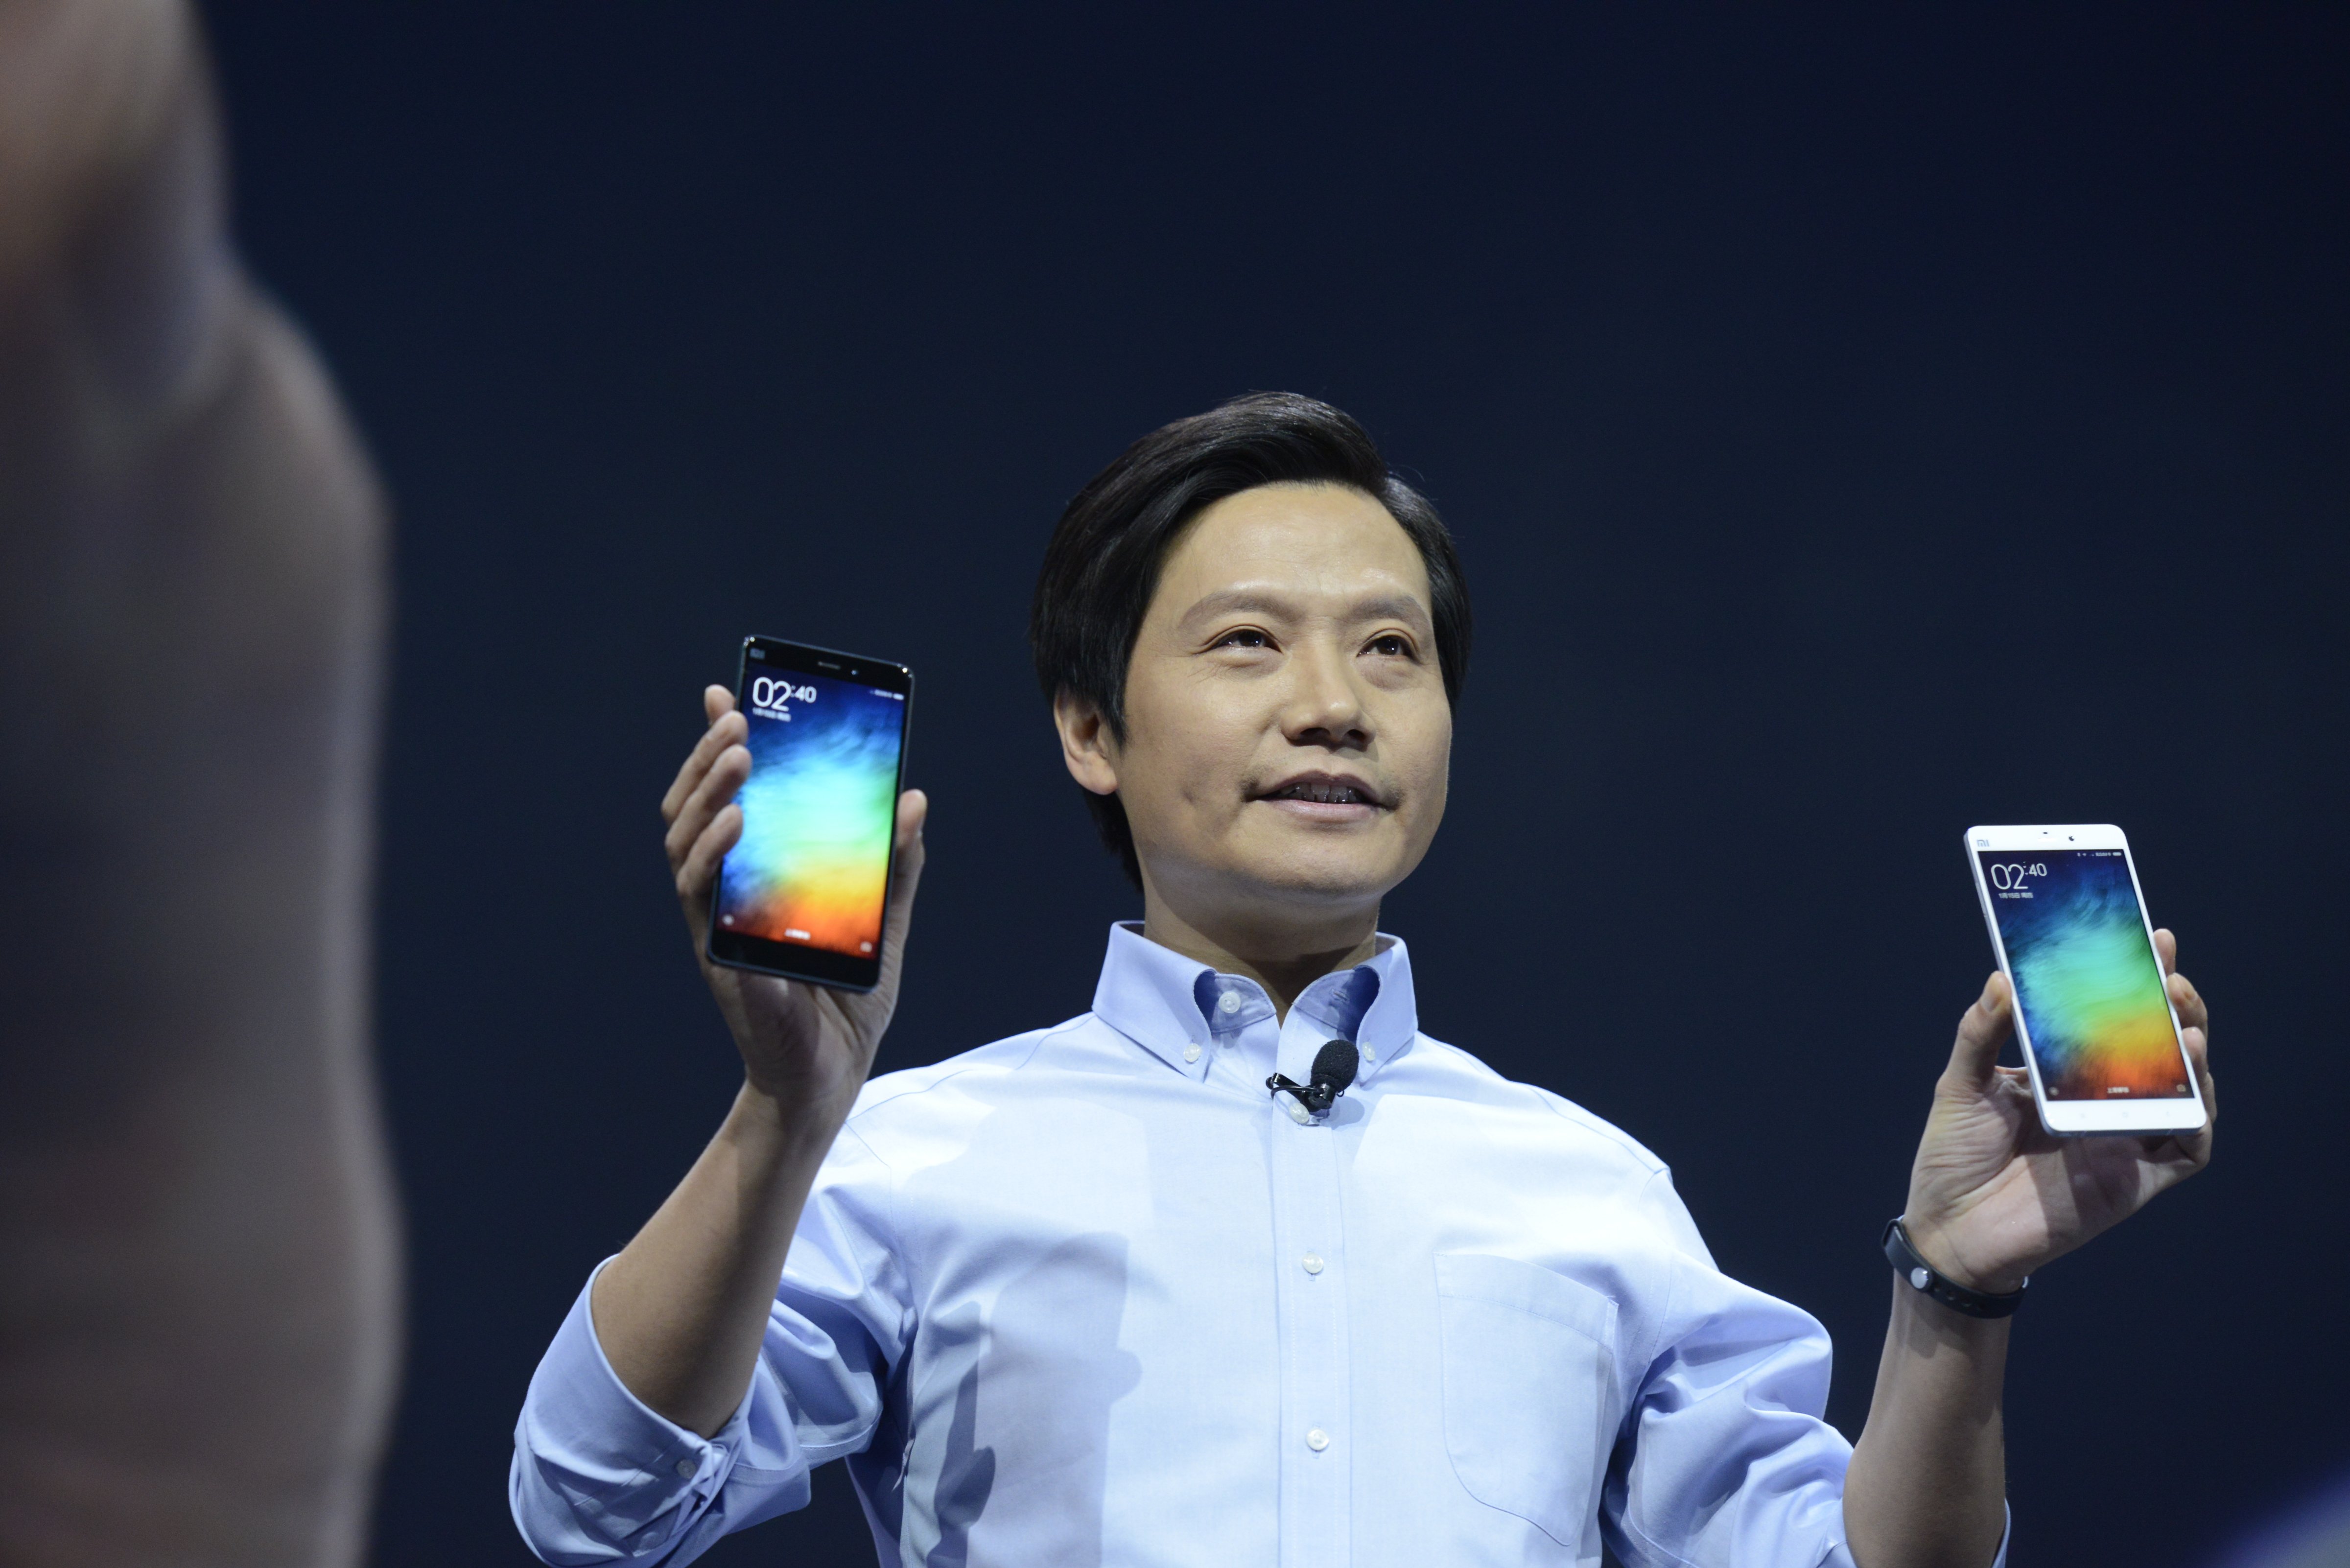 Lei Jun Attends Xiaomi Inc., New Product Beijing Press Conference